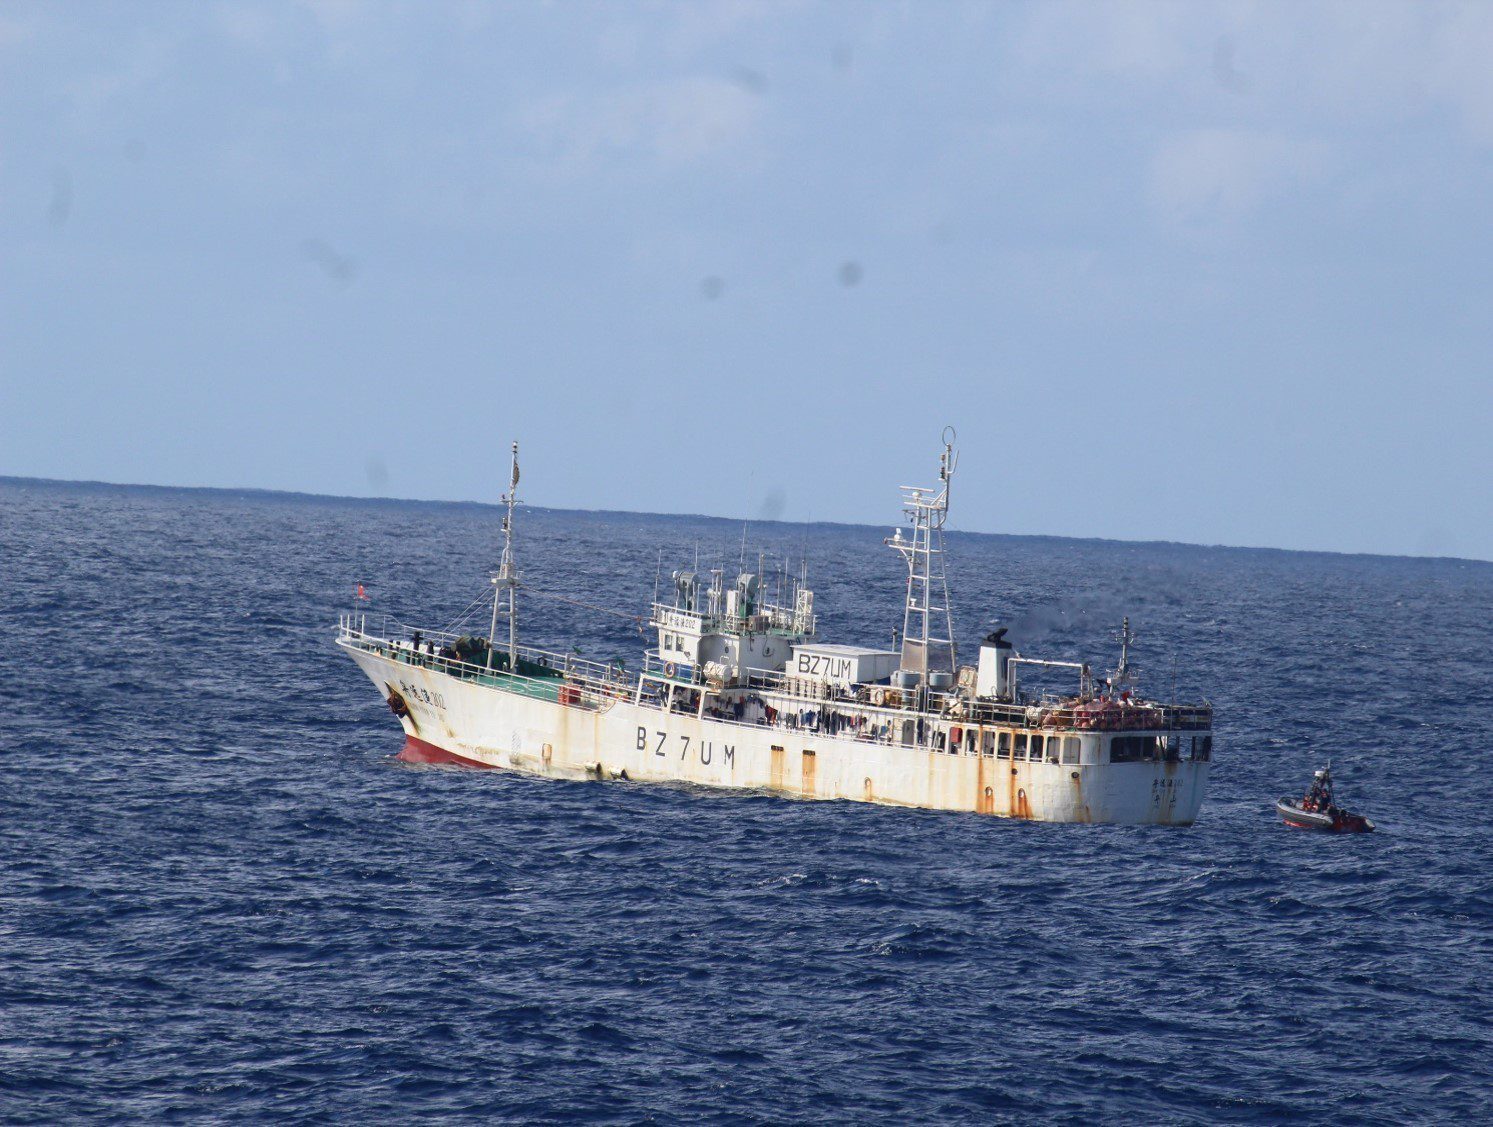 A boarding team from the Coast Guard Cutter Mellon (WHEC 717) approach a fishing vessel on the high seas in January 2019 while patrolling in support of counter-Illegal, Unregulated and Unreported fishing and global security missions. U.S. Coast Guard Photo